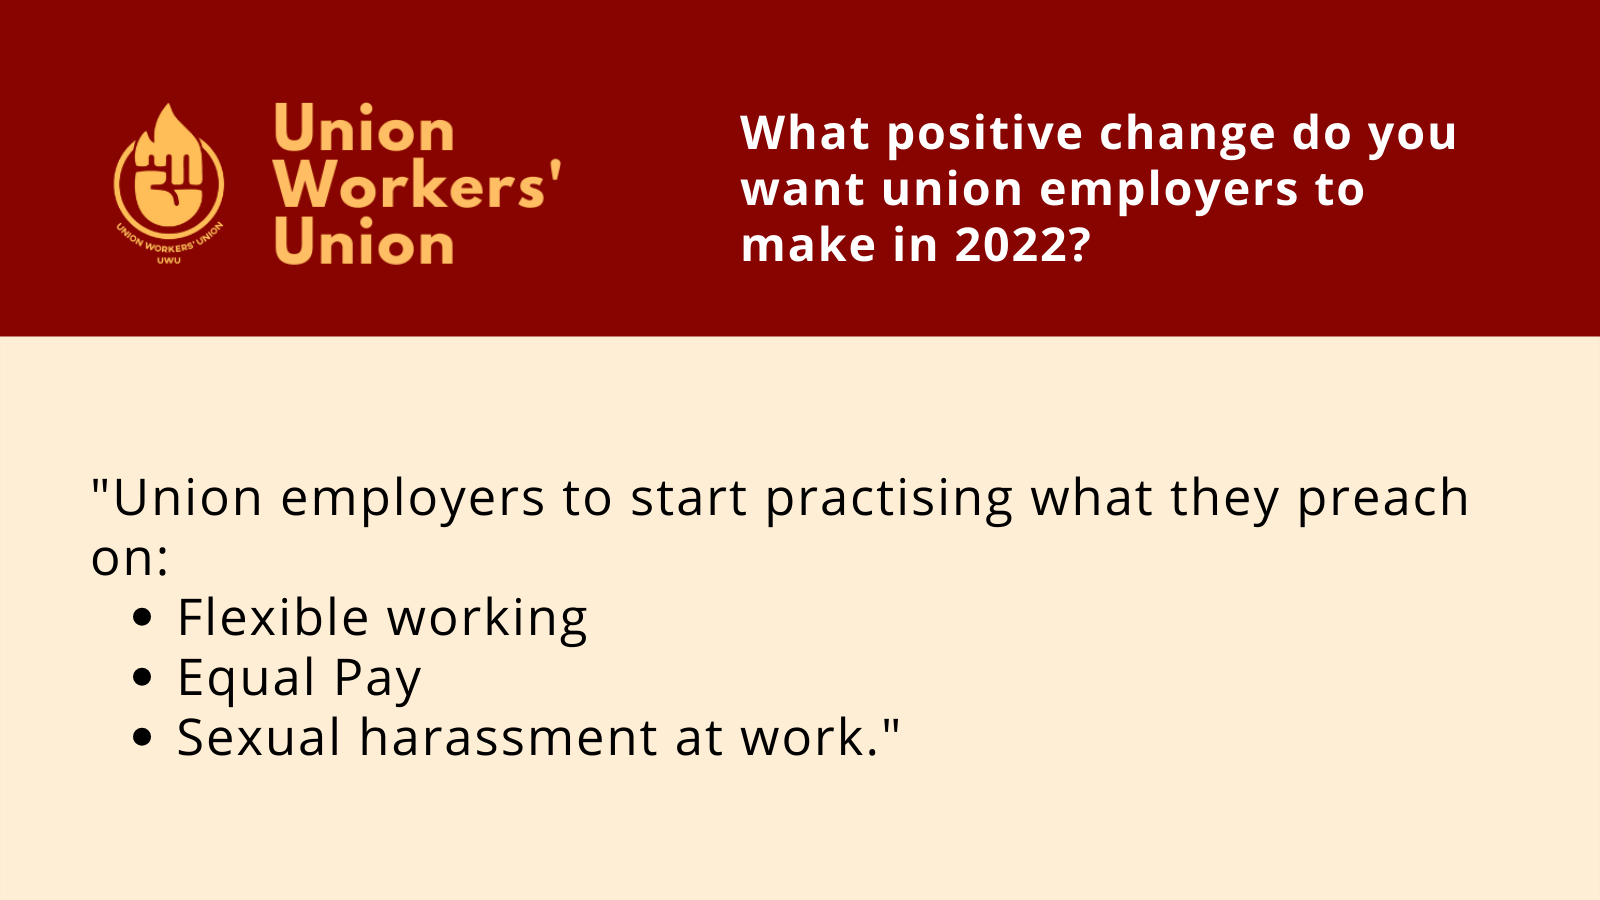 UWU logo next to question, what positive change do you want union employers to make in 2022? Member response: Union employers to start practising what they preach on: Flexible working, Equal Pay and Sexual harassment at work